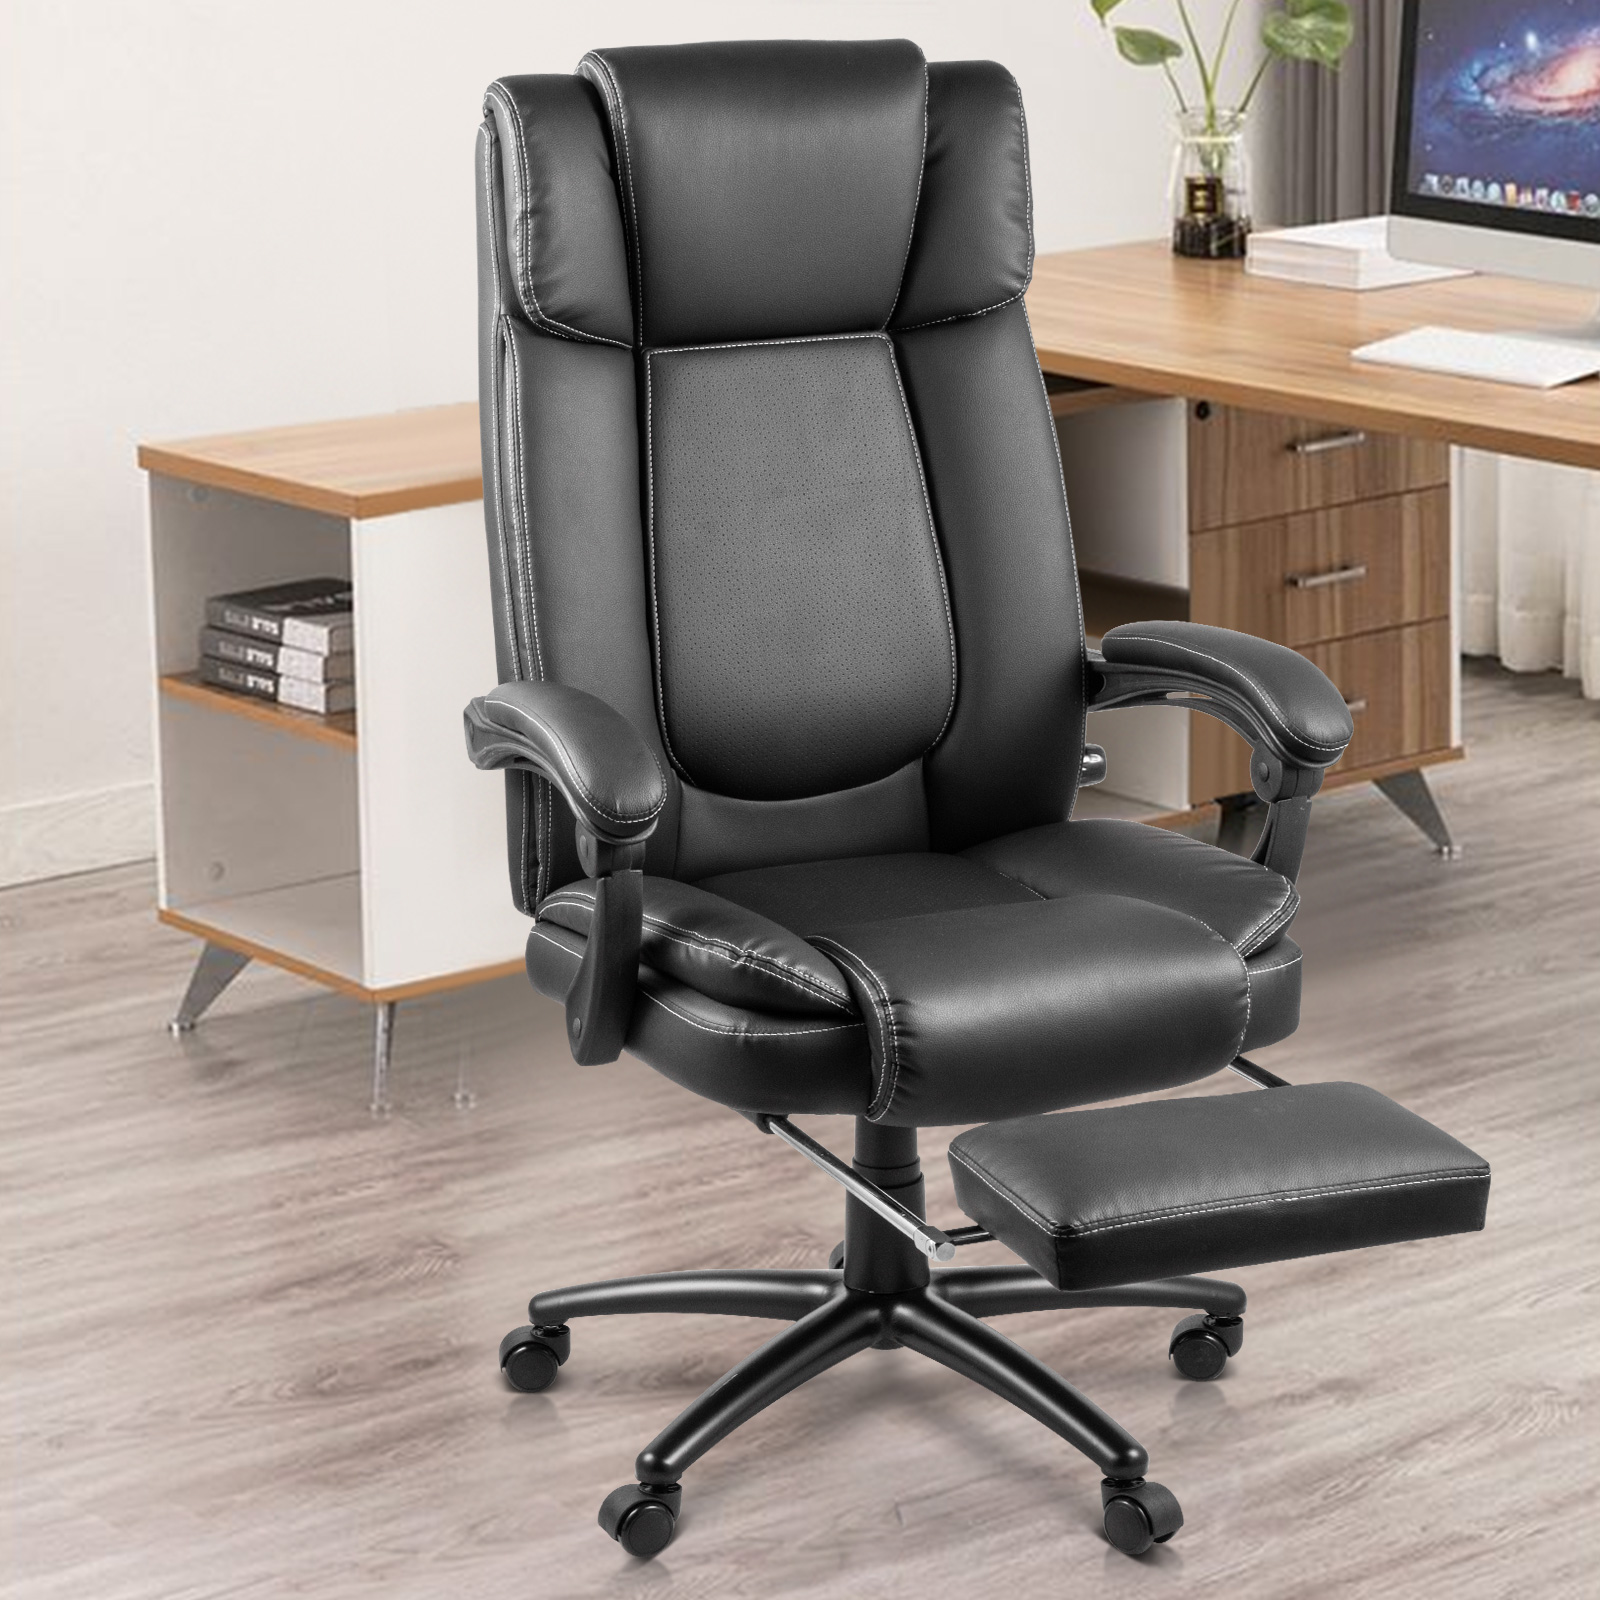 Executive Chair High Back Office Chair Reclining Height Adjustable